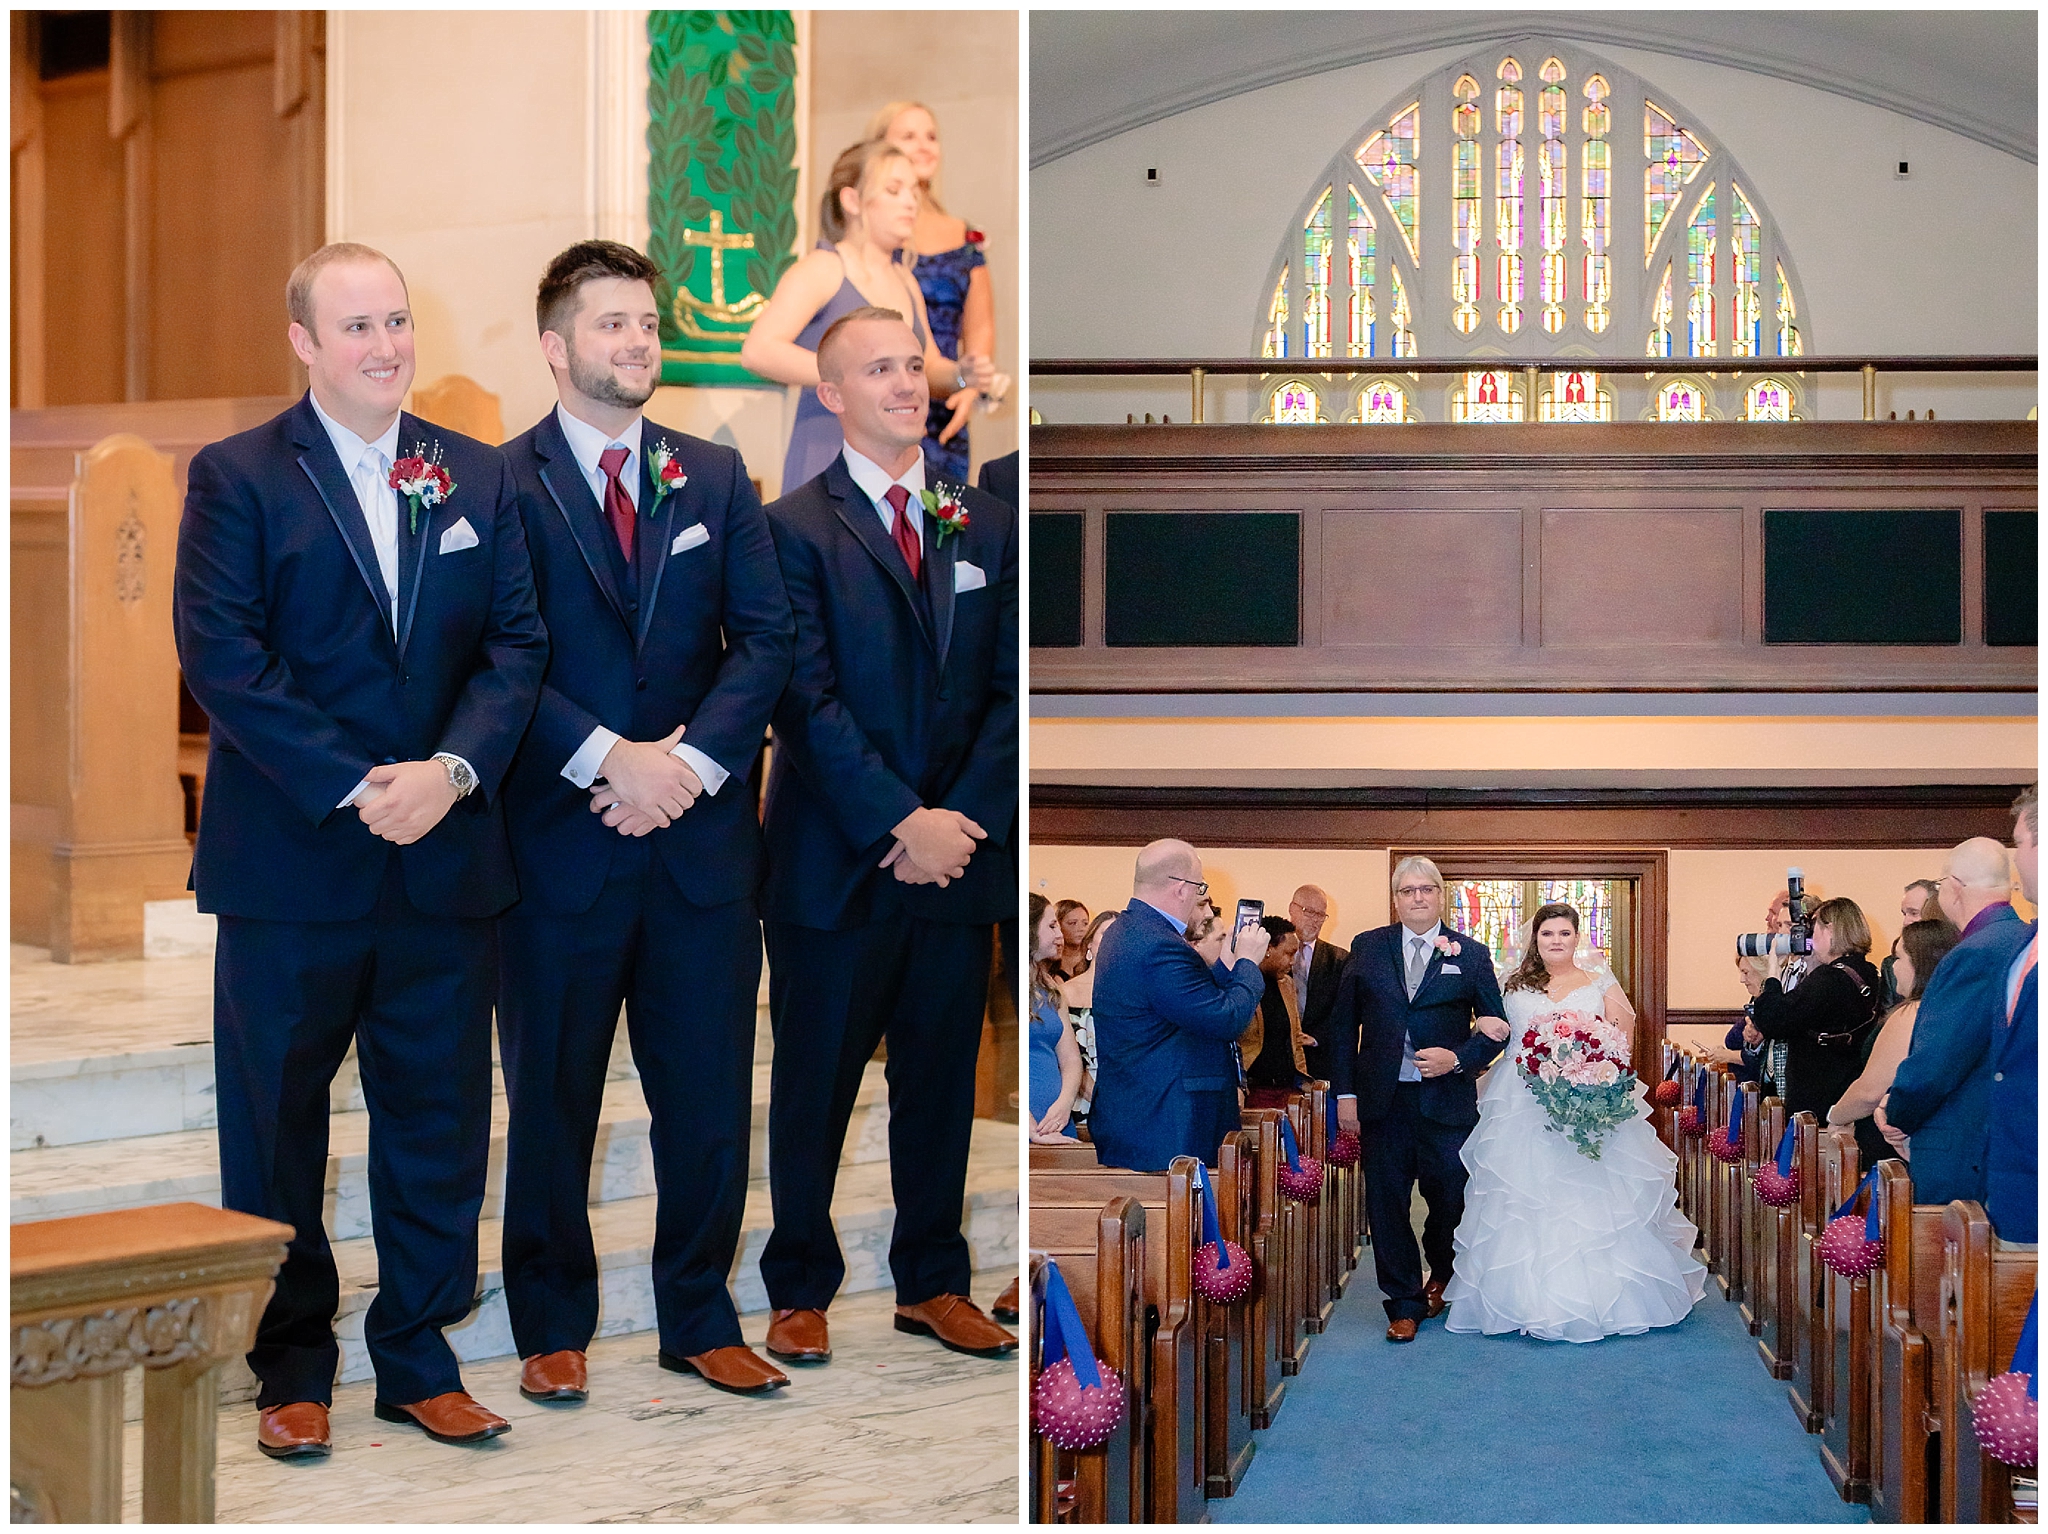 Groom and groomsmen as the bride is walked down the aisle by her father at Mt. Lebanon United Methodist Church